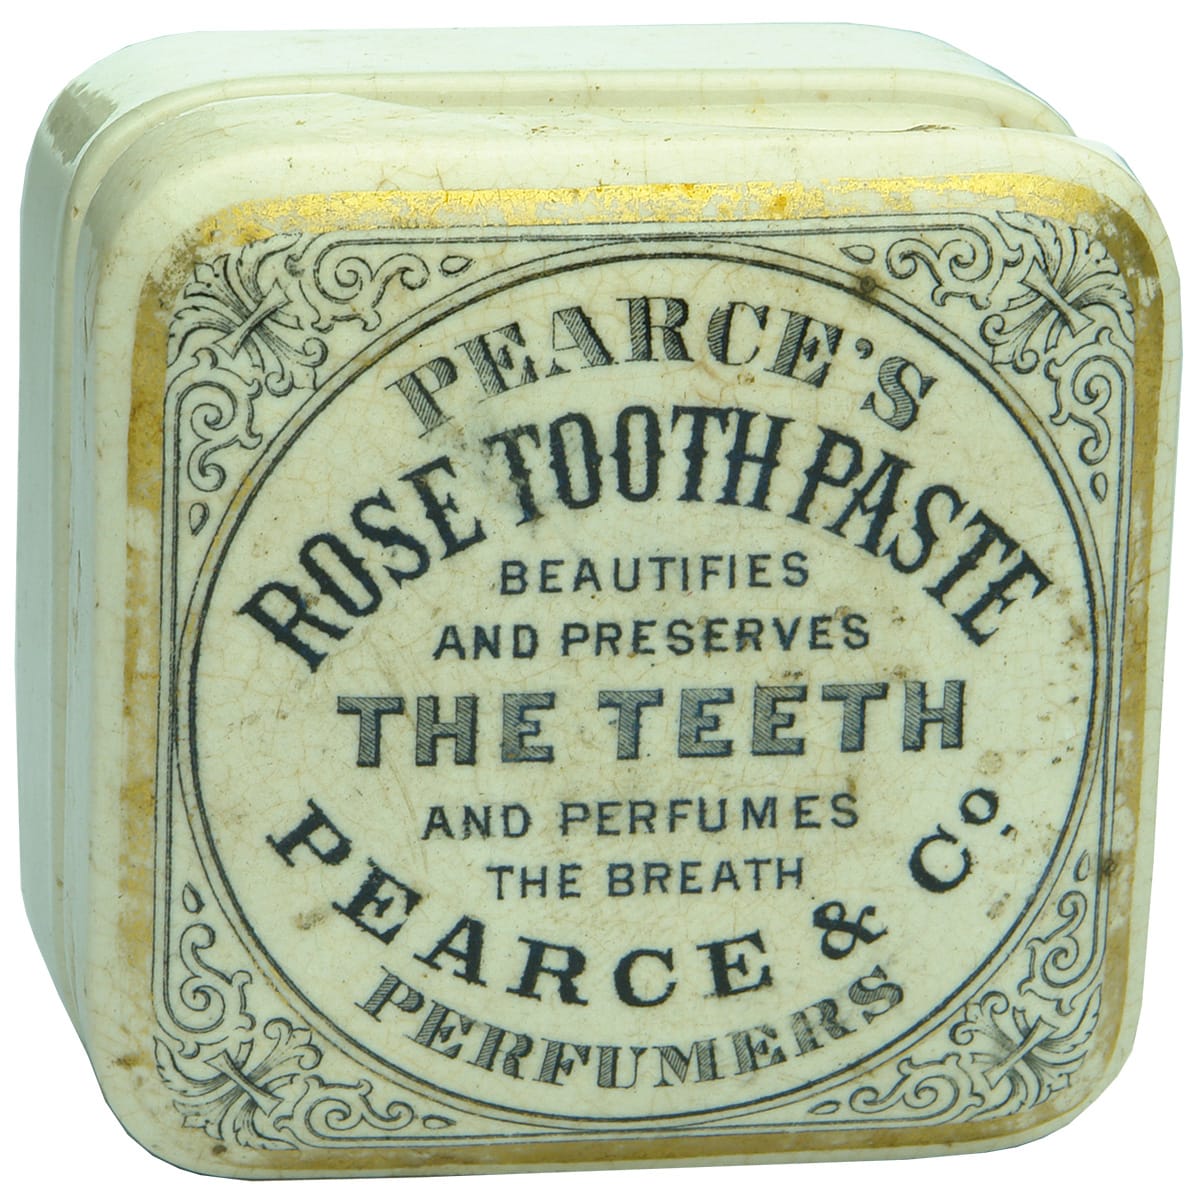 Pearce's Rose Tooth Paste Perfumers Pot Lid